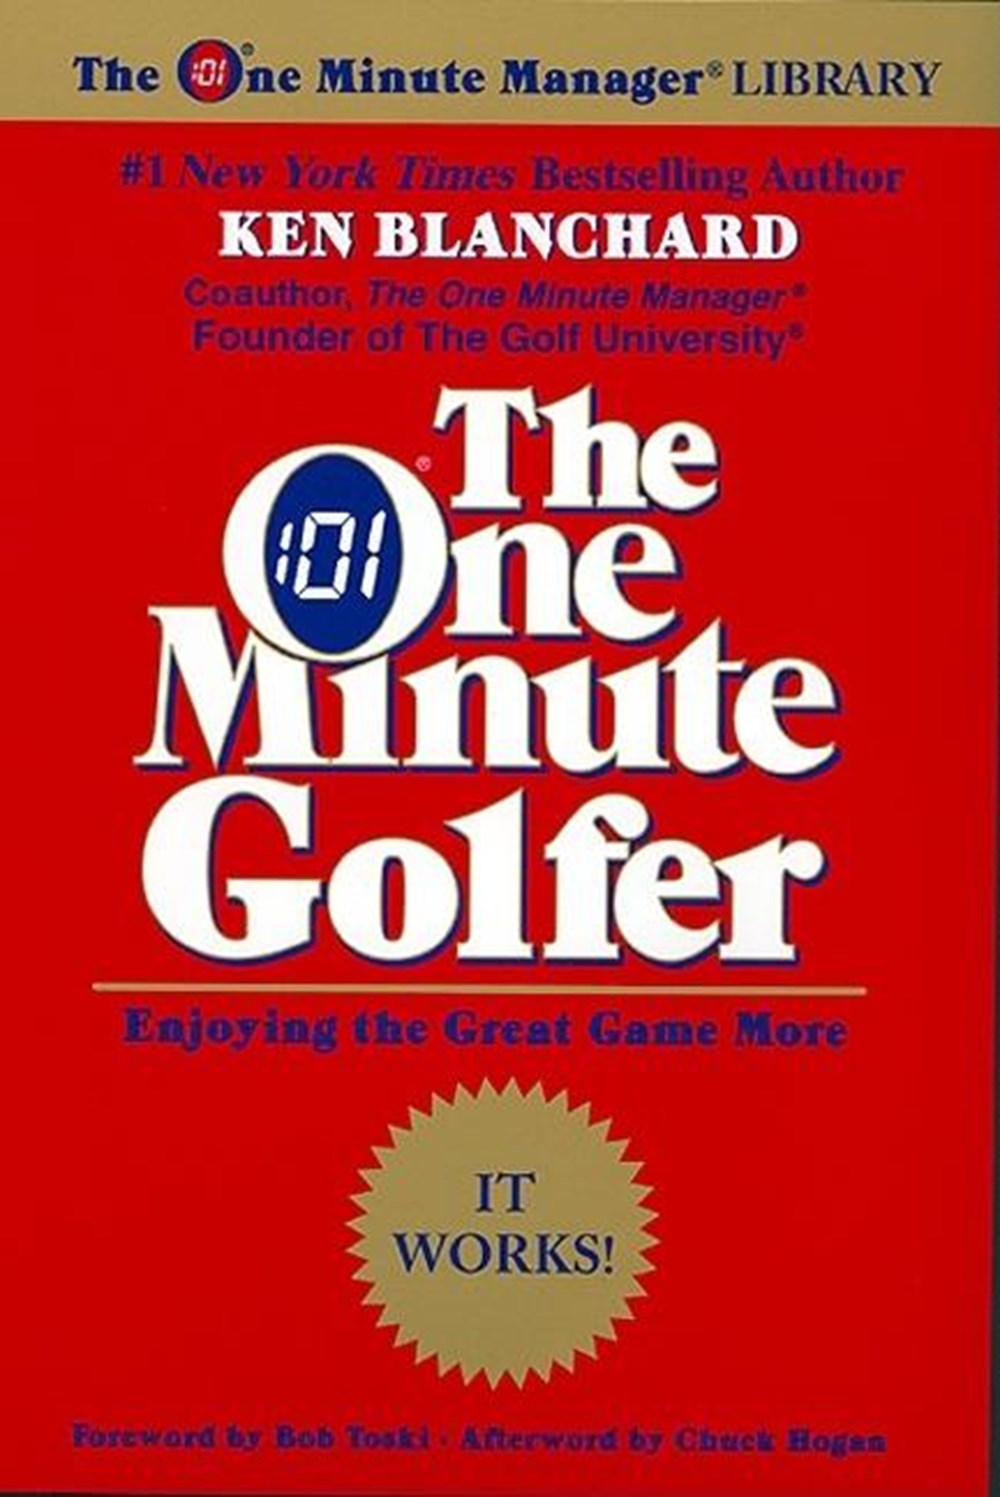 One Minute Golfer: Enjoying the Great Game More